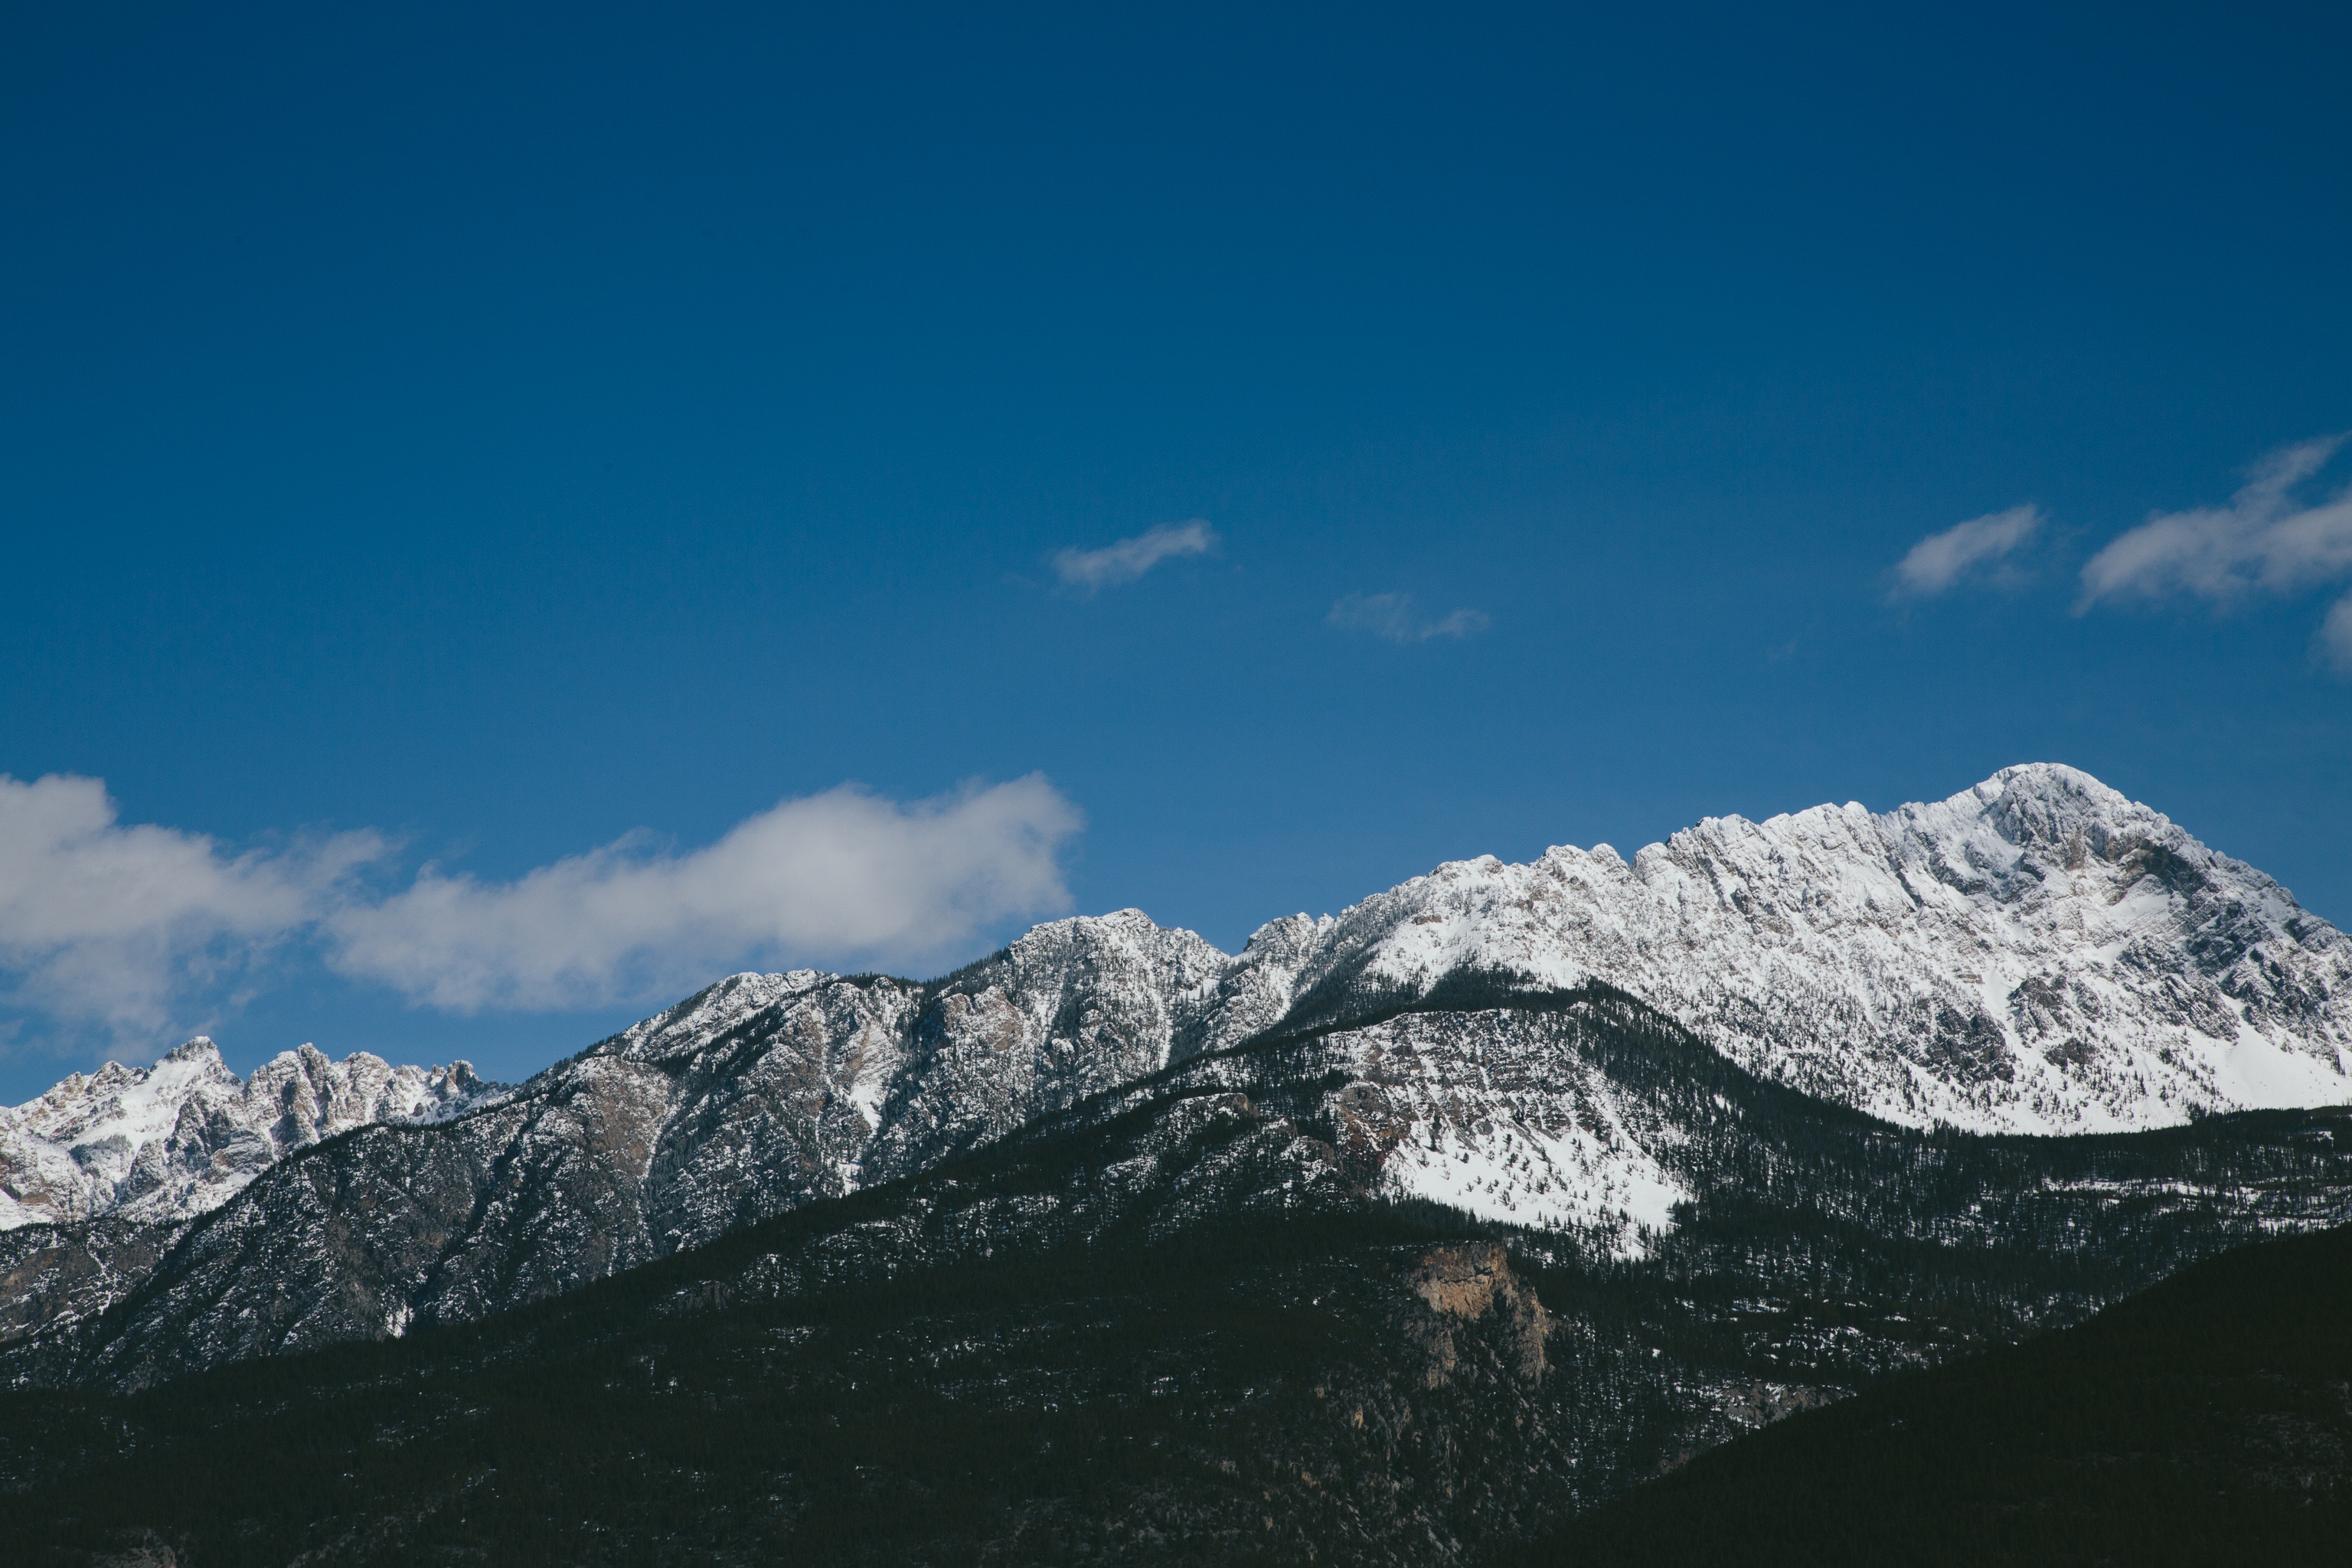 Greg Shield, Photography, Landscape, Nature, Sky, Clouds, Mountains, Snowy peak, Far view, Forest, Snow, Tundra Wallpaper